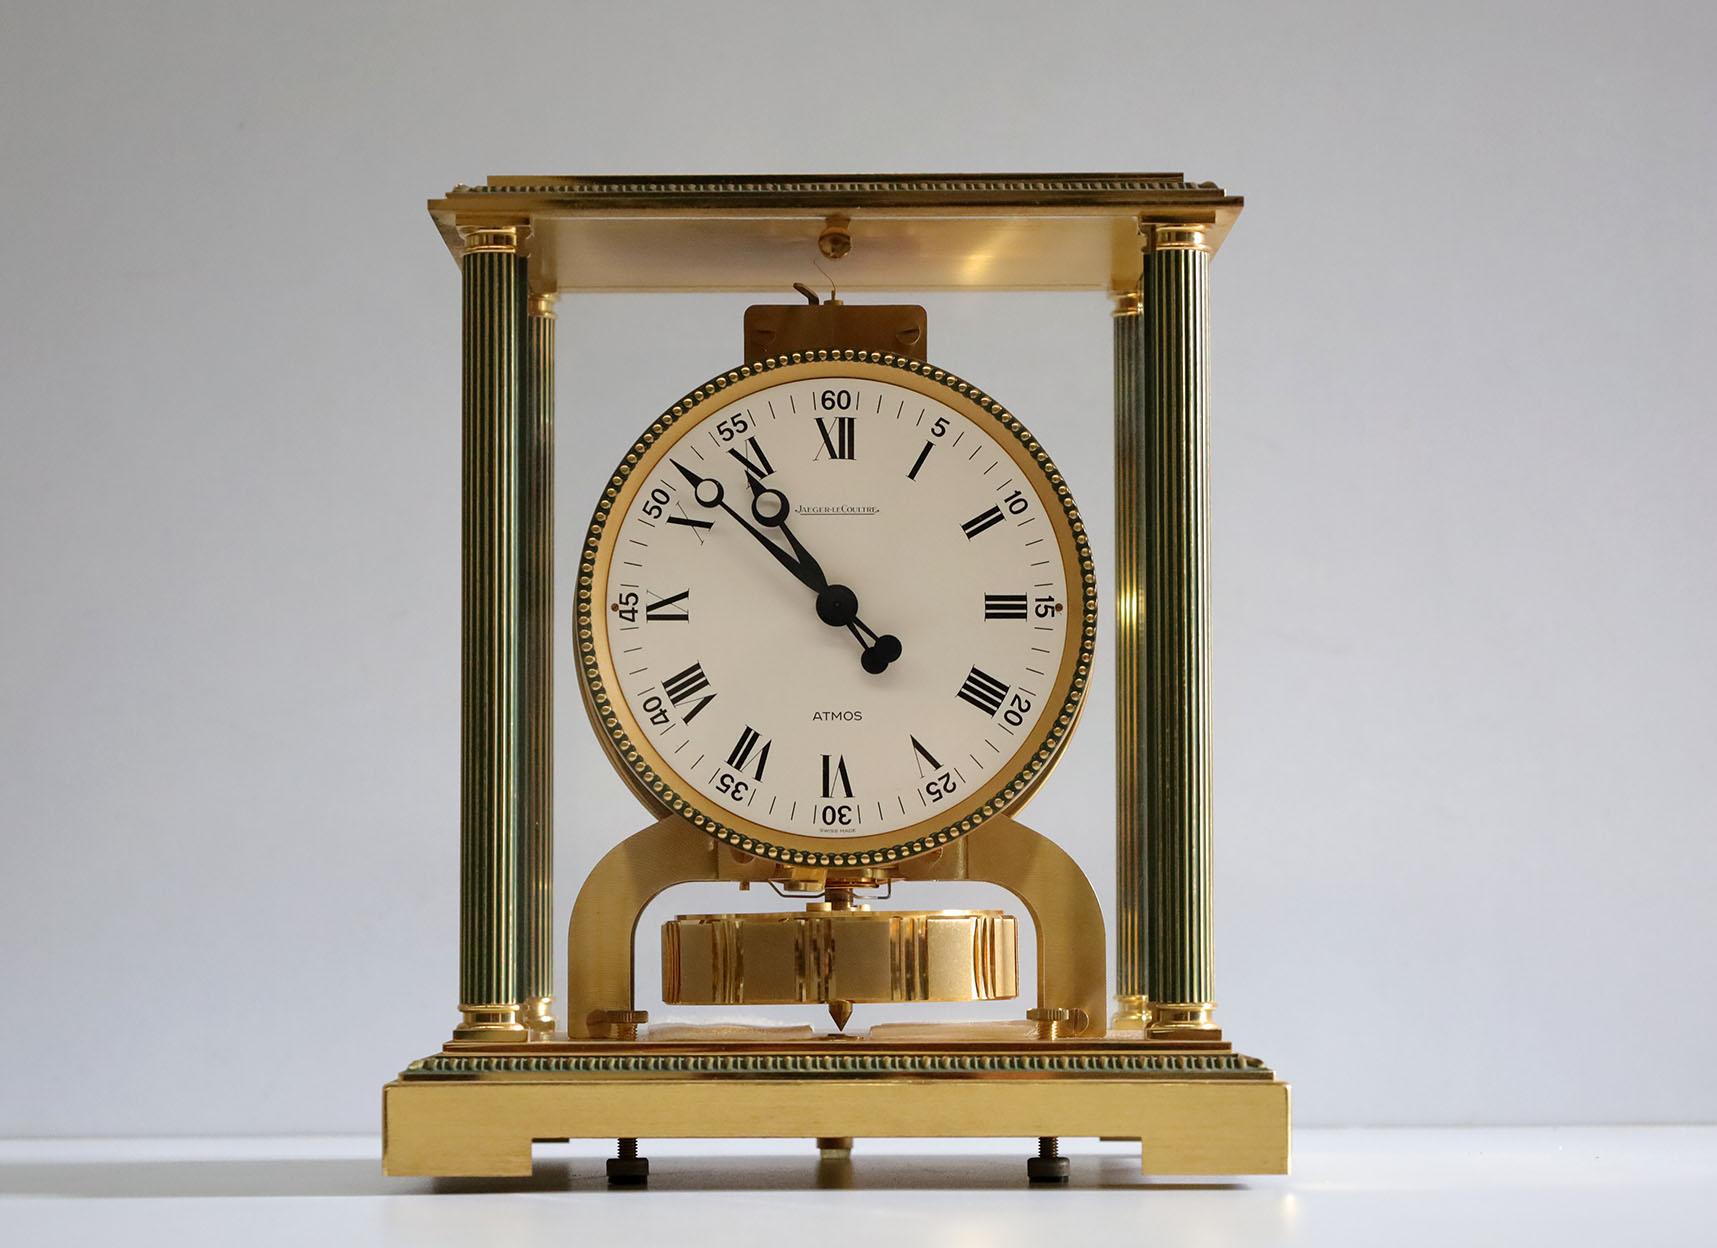 A beautiful Jaeger LeCoultre mid century Vendome Atmos clock. This piece looks wonderful on a desk in a study, or on a mantelpiece or table. Very elegant. Working perfect.